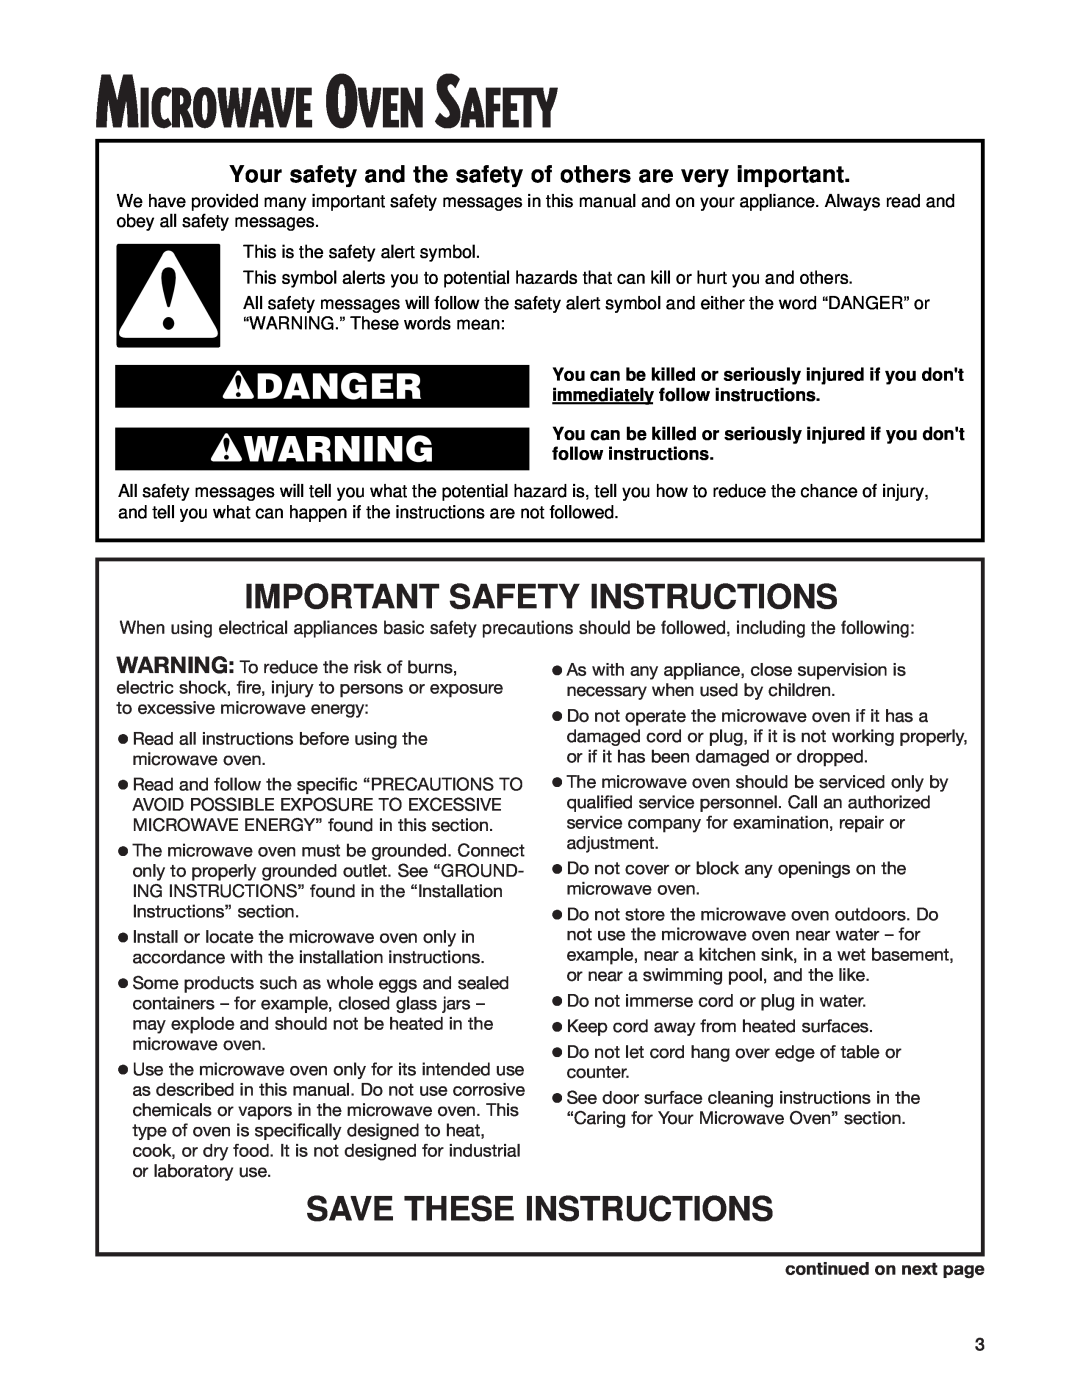 Whirlpool GT4185SK Microwave Oven Safety, wDANGER wWARNING, Important Safety Instructions, Save These Instructions 